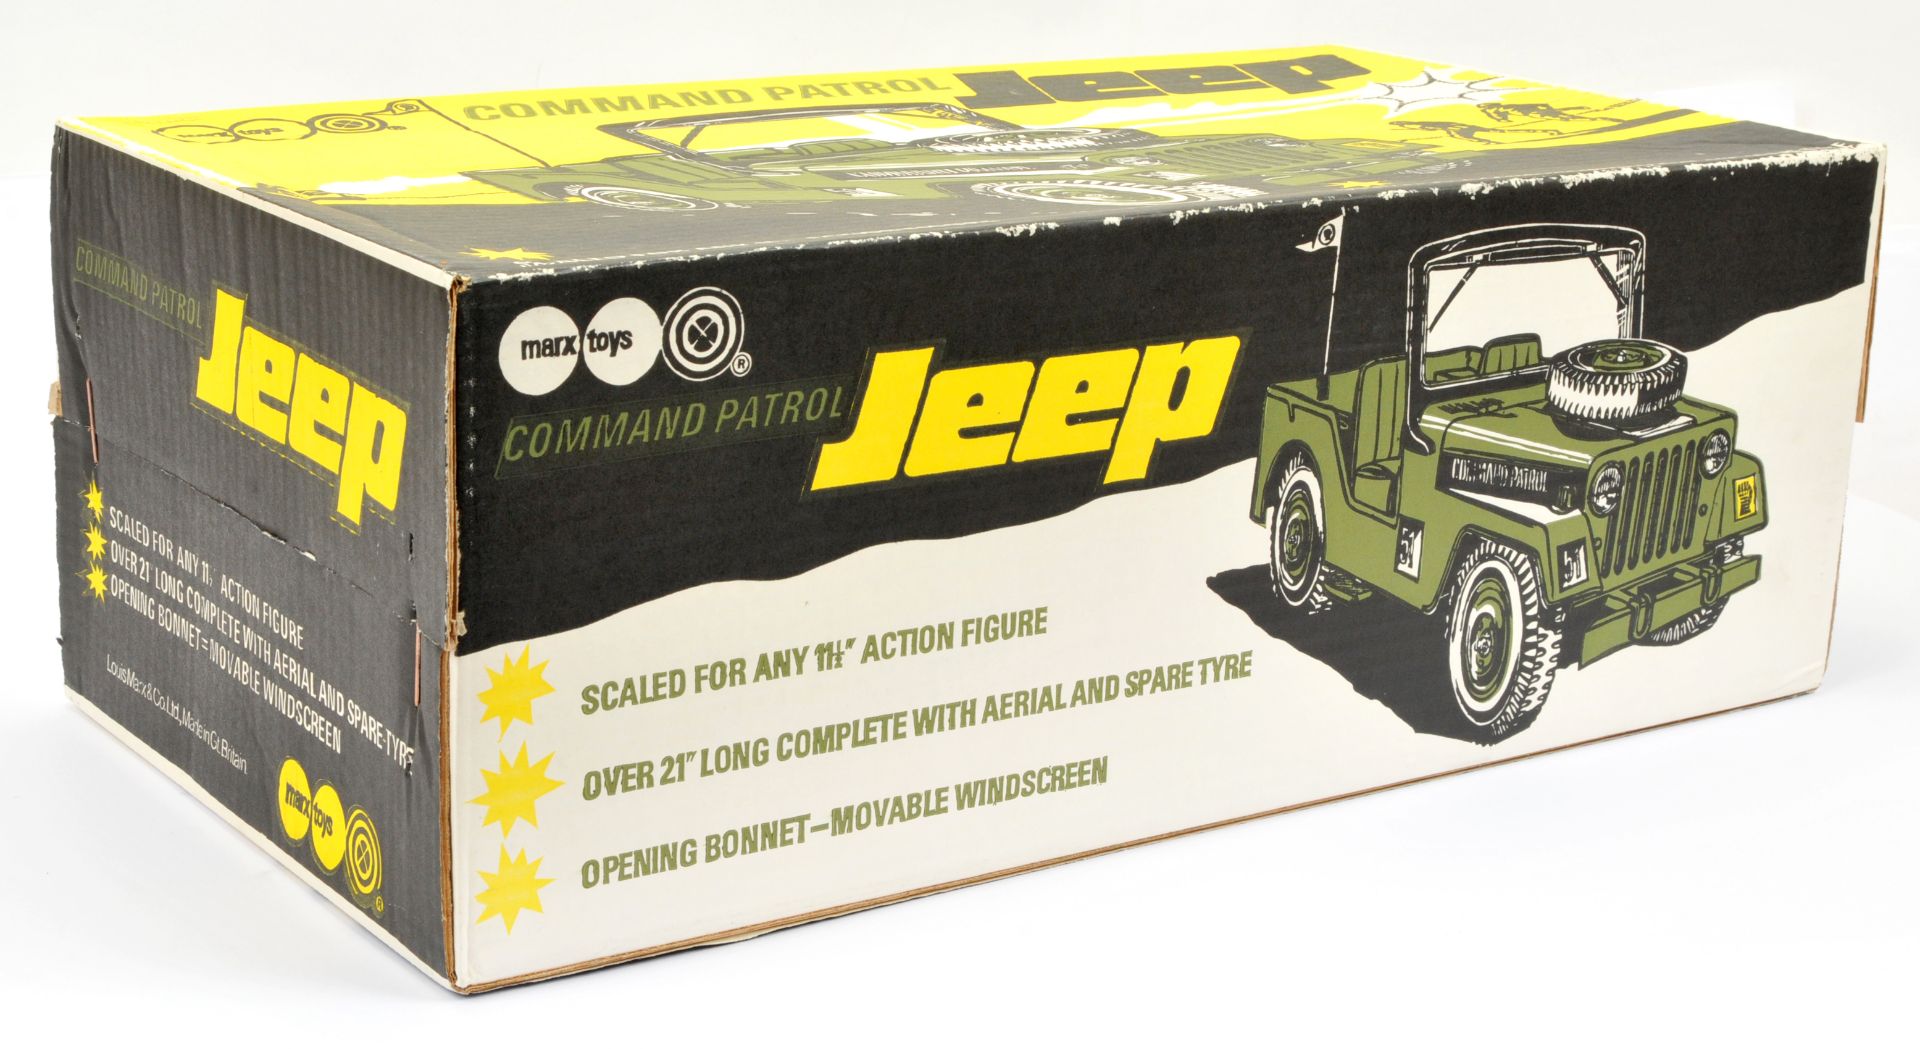 Marx Toys Command Patrol Jeep, scaled for any 11 1/2" Action figure, over 21" long, complete with... - Image 3 of 3